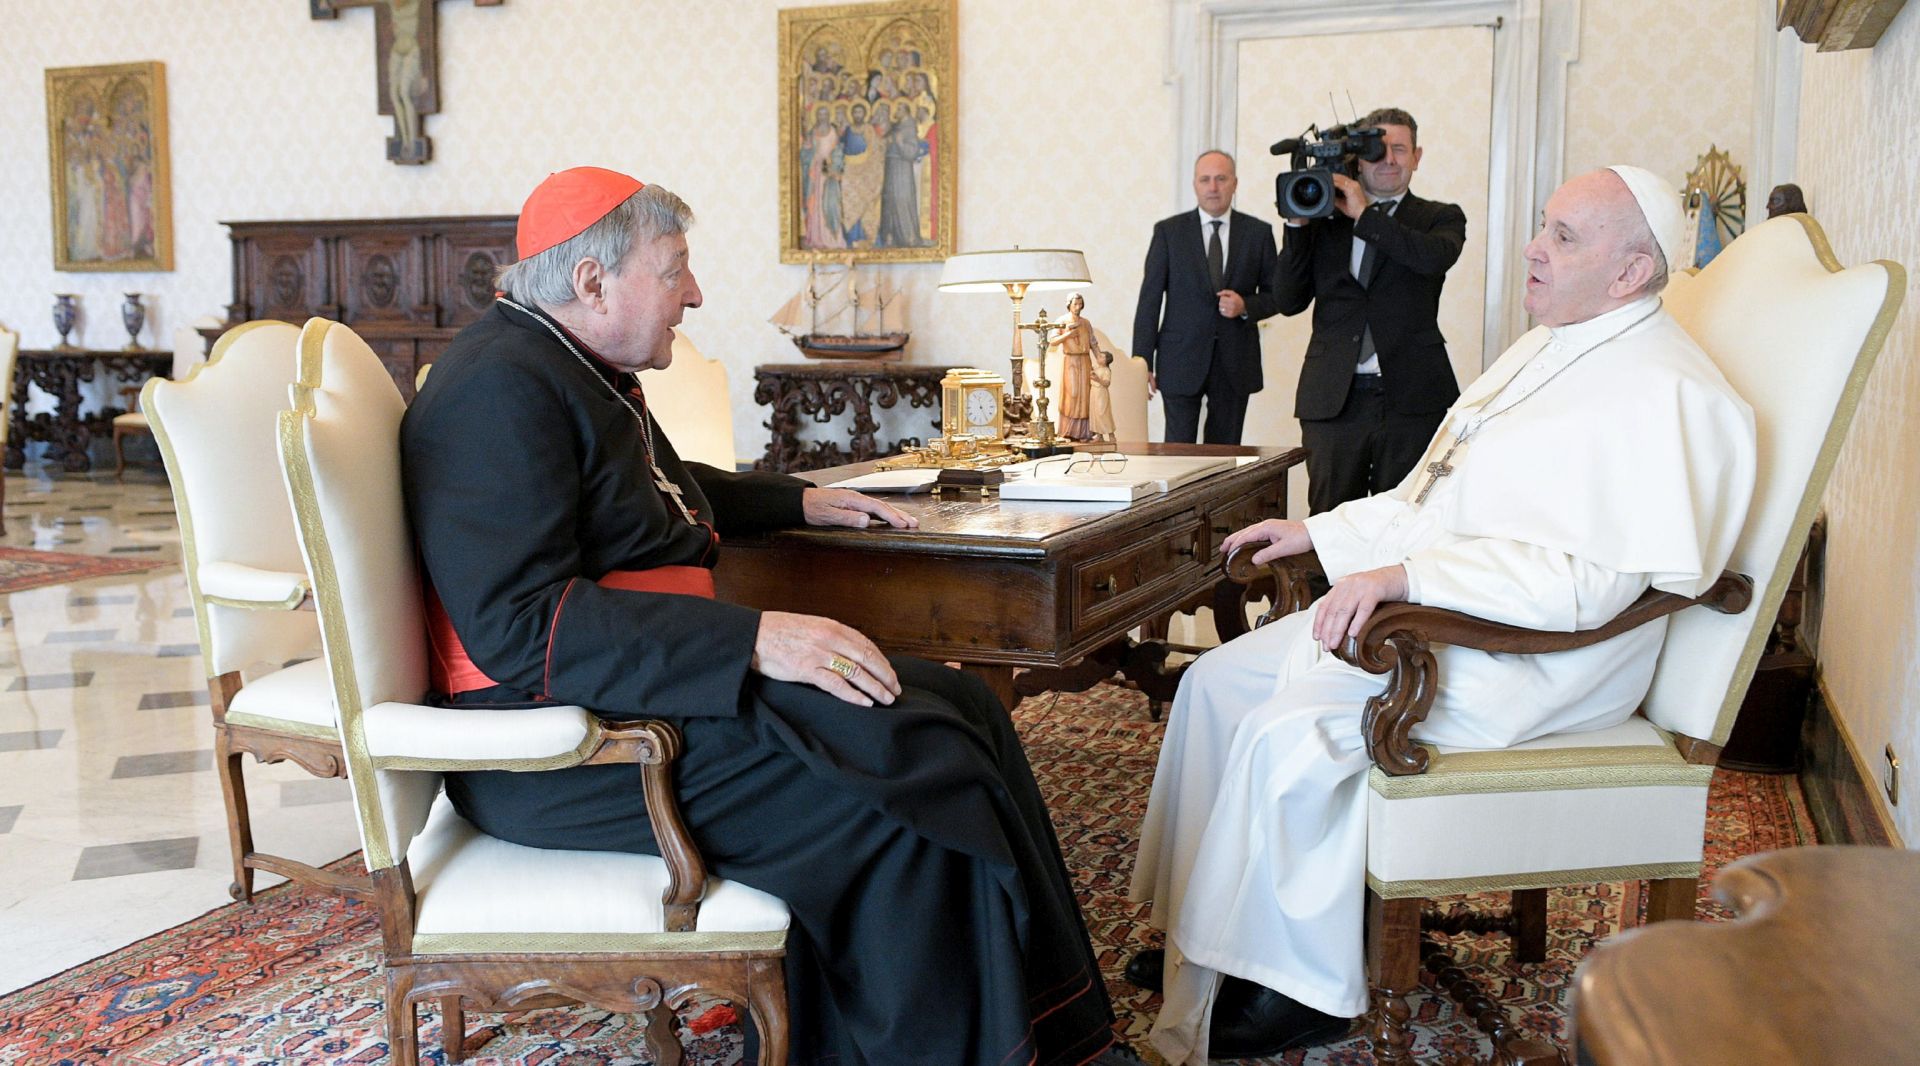 epa08737574 A handout picture provided by the Vatican Media shows Pope Francis speaking with Cardinal George Pell, Prefect Emeritus of the Secretariat for the Economy, during the audience he granted him, in Vatican City, 12 October 2020.  EPA/VATICAN MEDIA HANDOUT  HANDOUT EDITORIAL USE ONLY/NO SALES